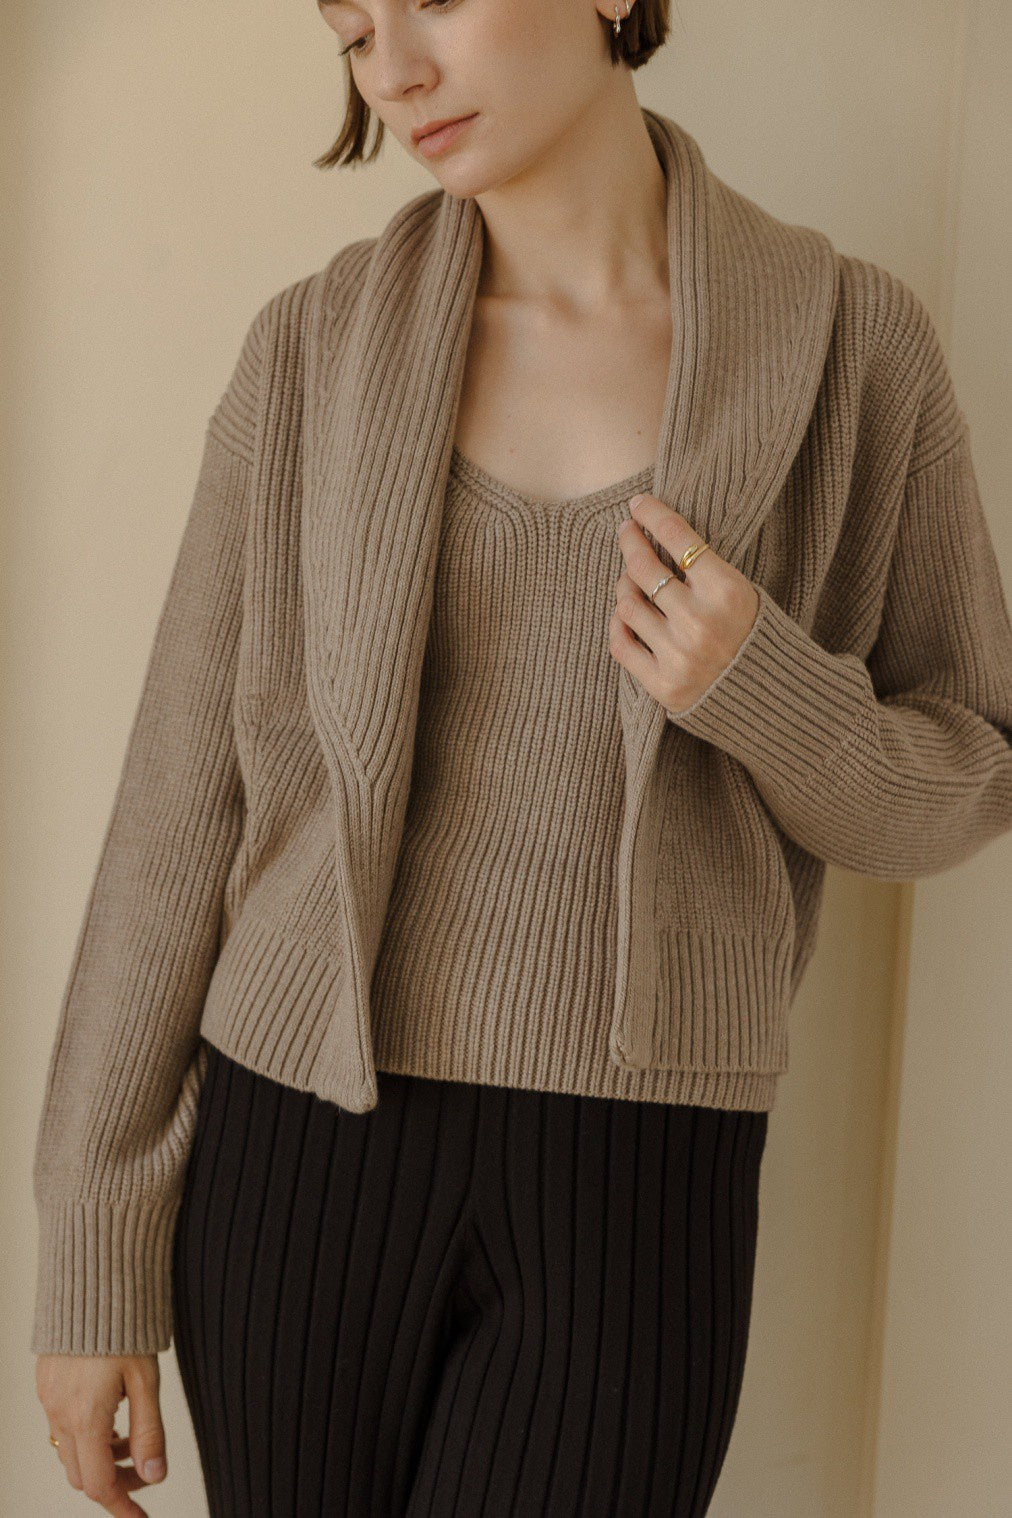 The Eloise Knit Top + Cardigan Set - Sold Separately